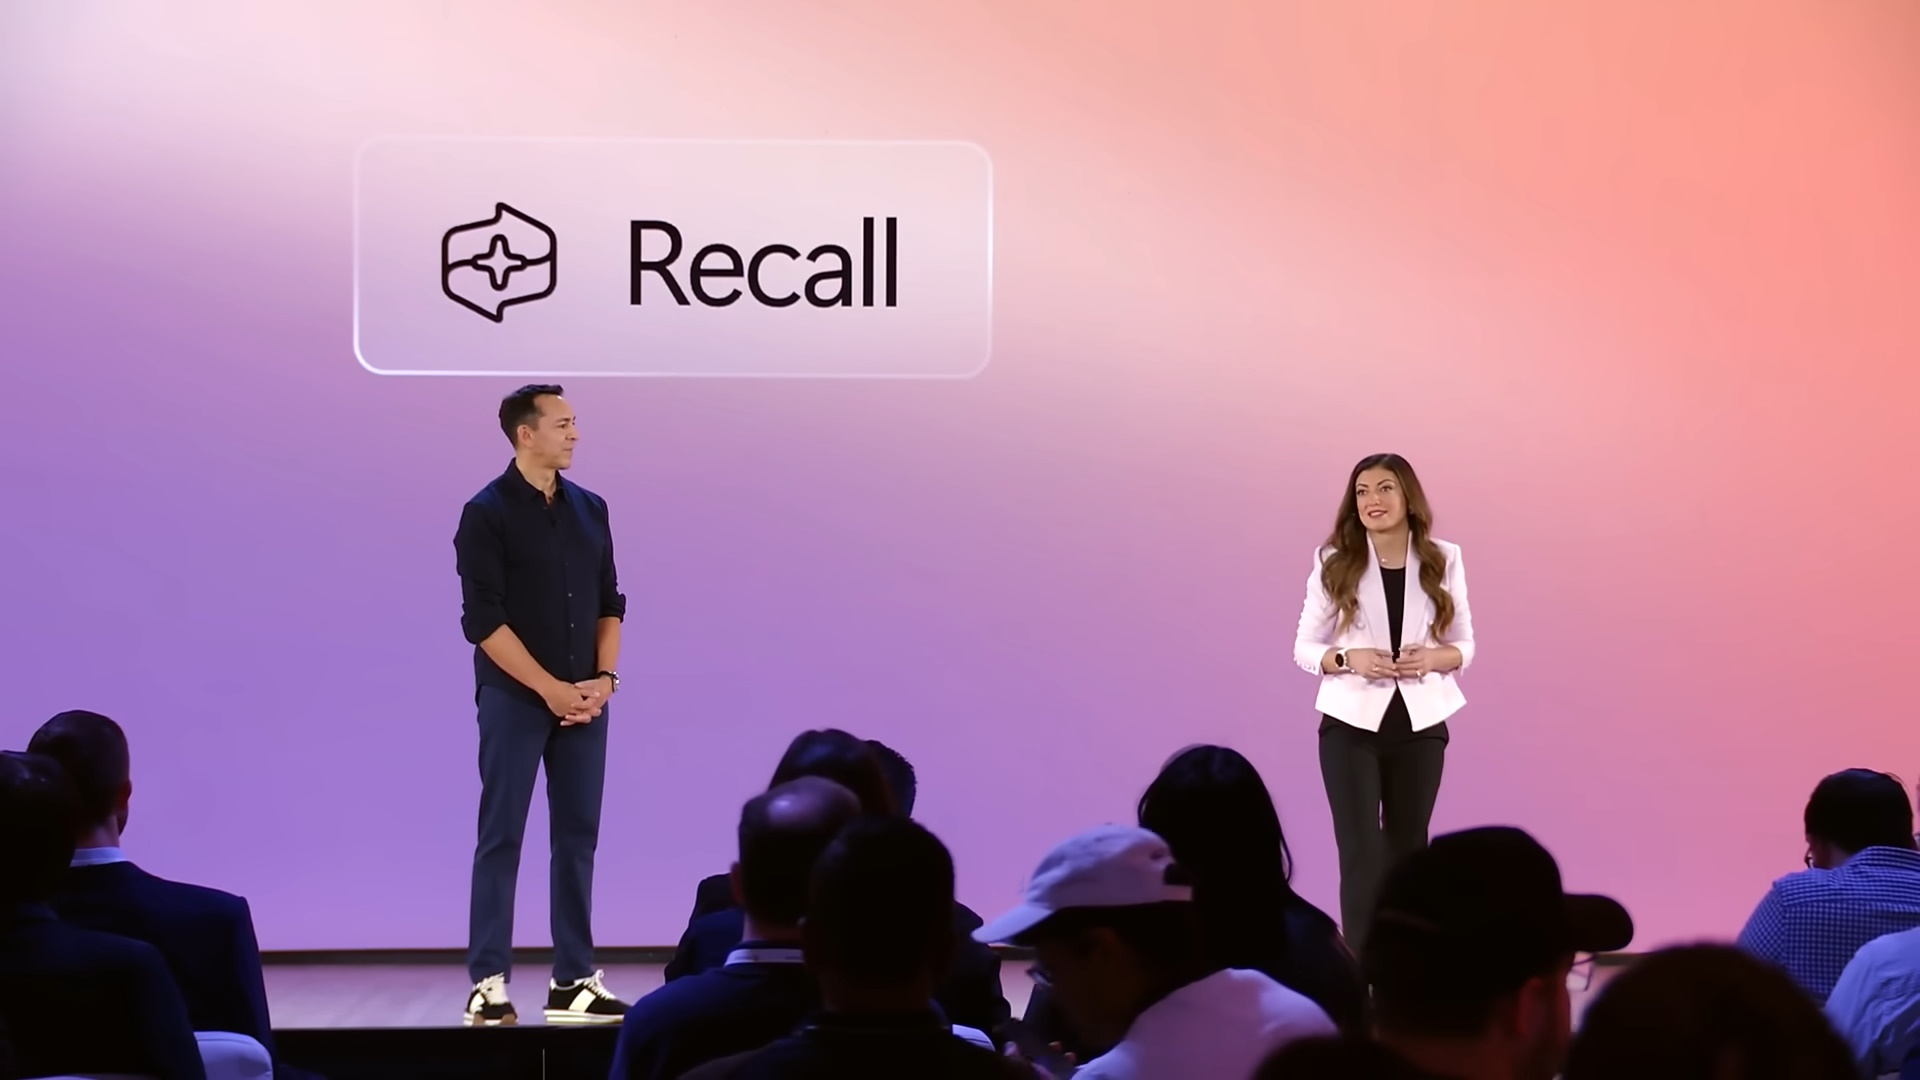 Microsoft Recall stage announcement